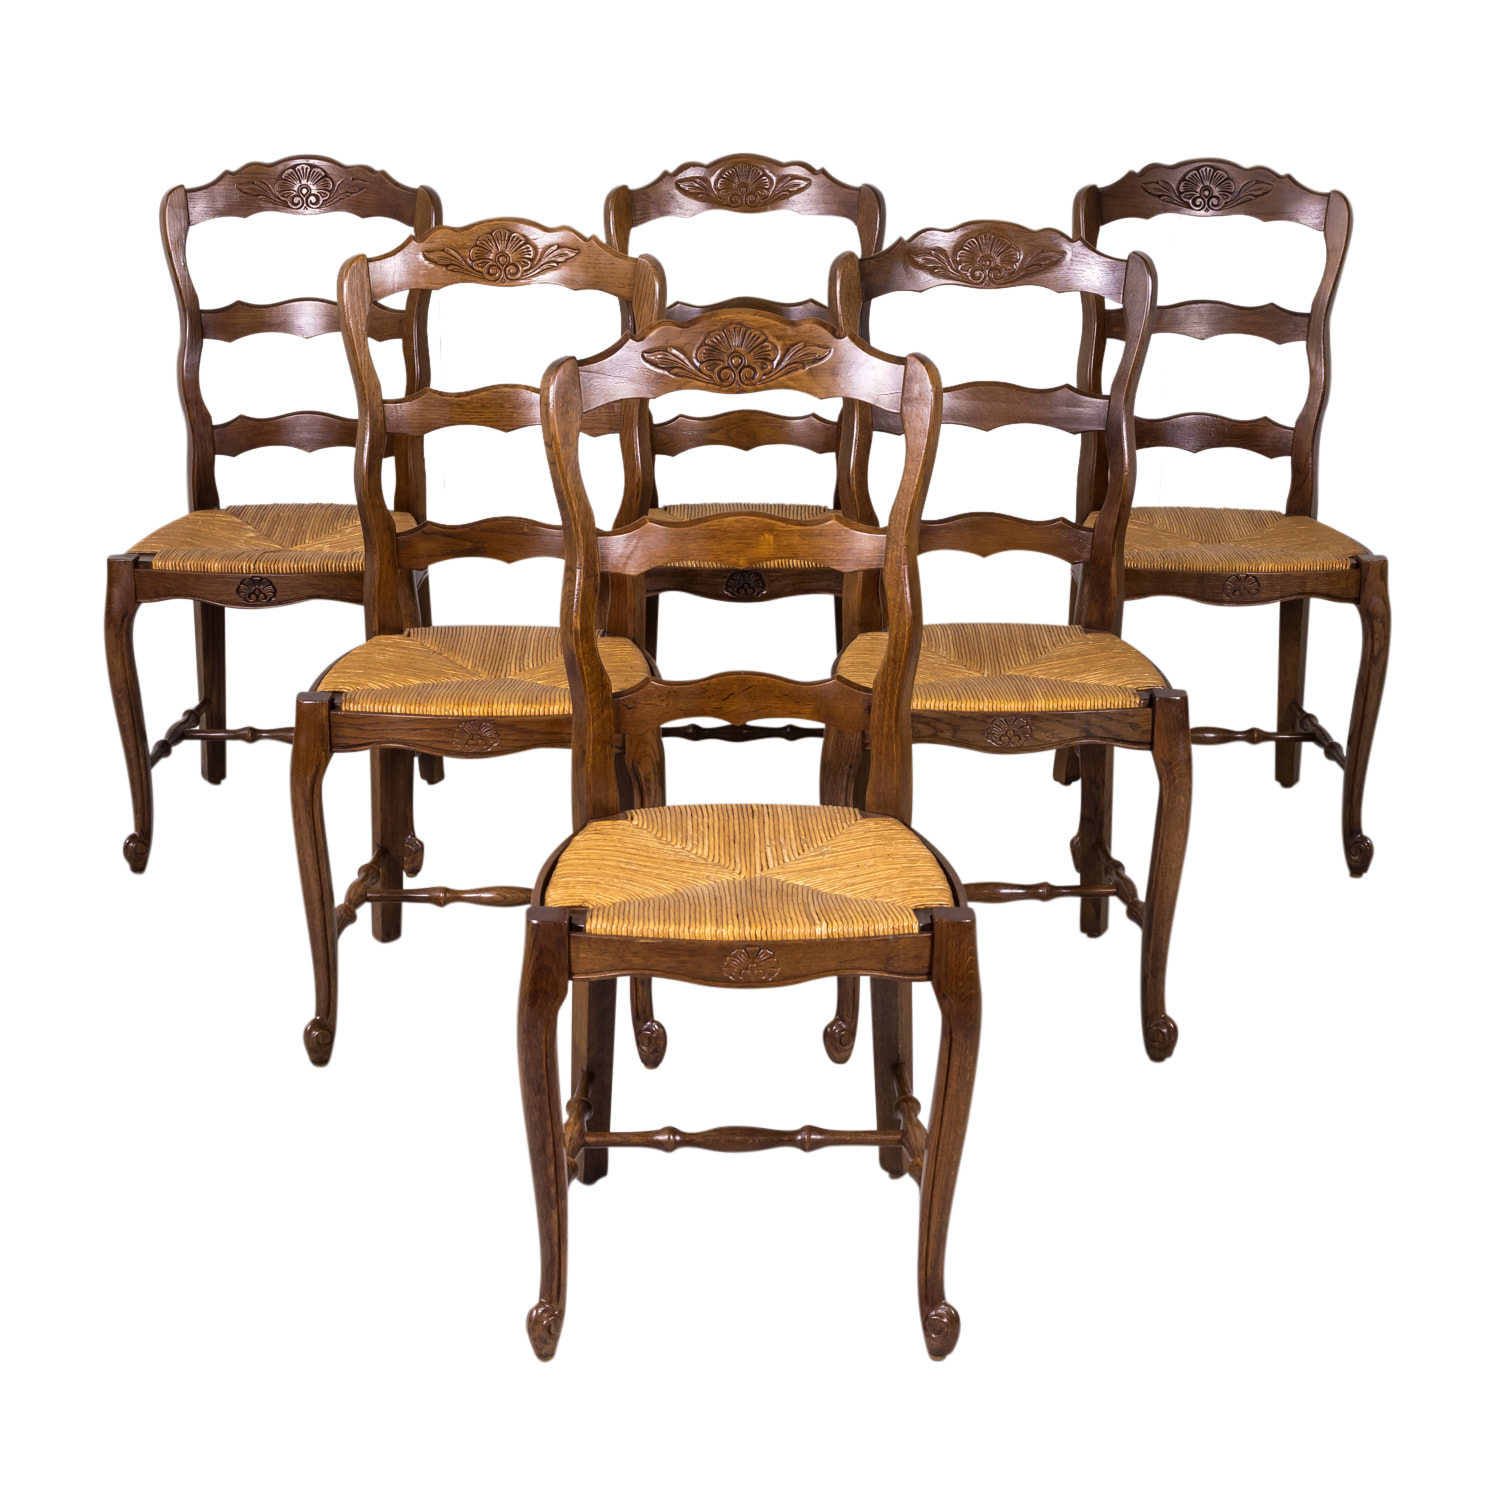 Antique Country French Louis Xv Style Oak Ladder Back Dining Chairs With Rush Seat Set Of Six